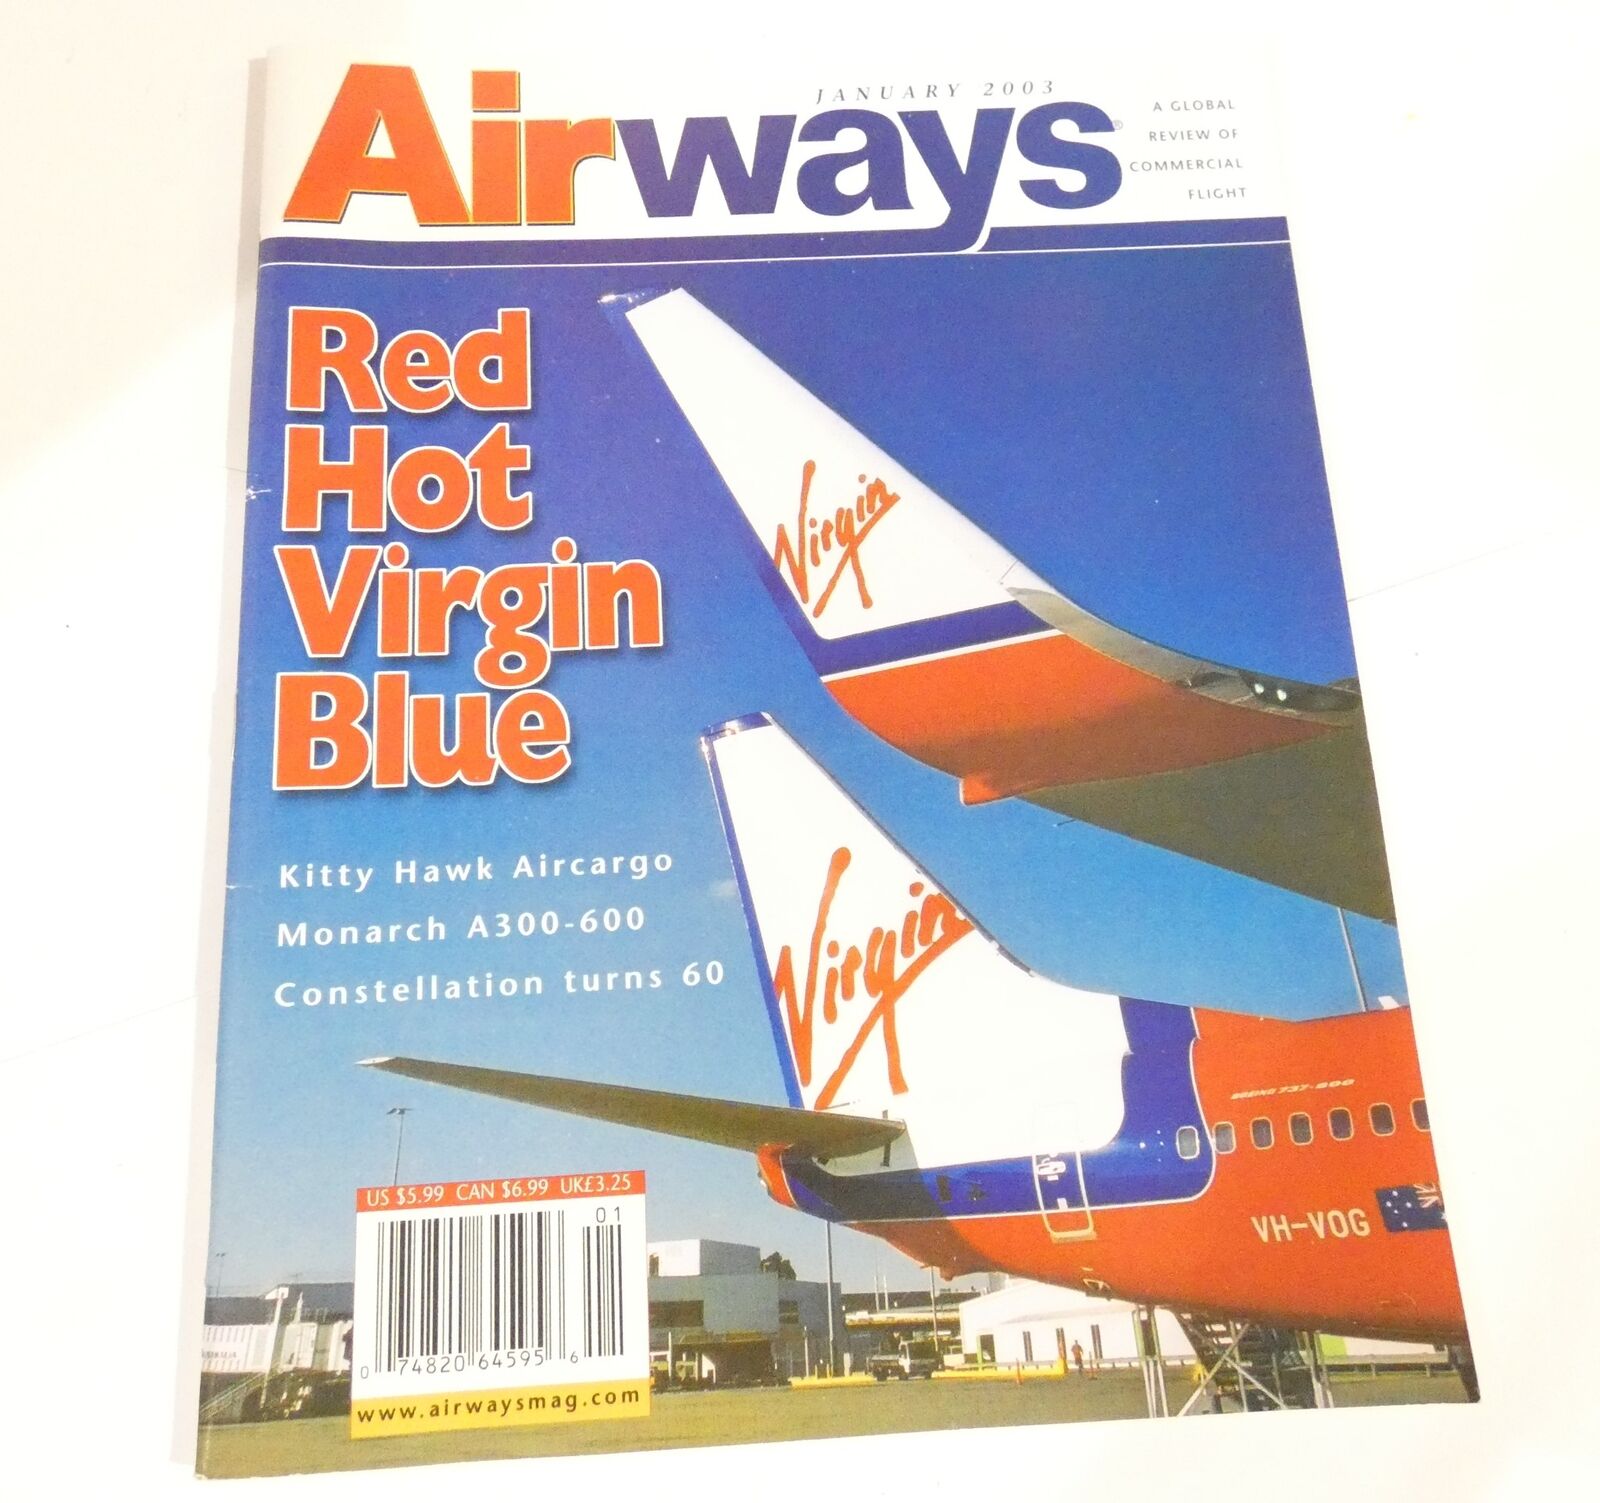 AIRWAYS MAGAZINE JANUARY 2003 A GLOBAL REVIEW OF COMMERCIAL FLIGHT